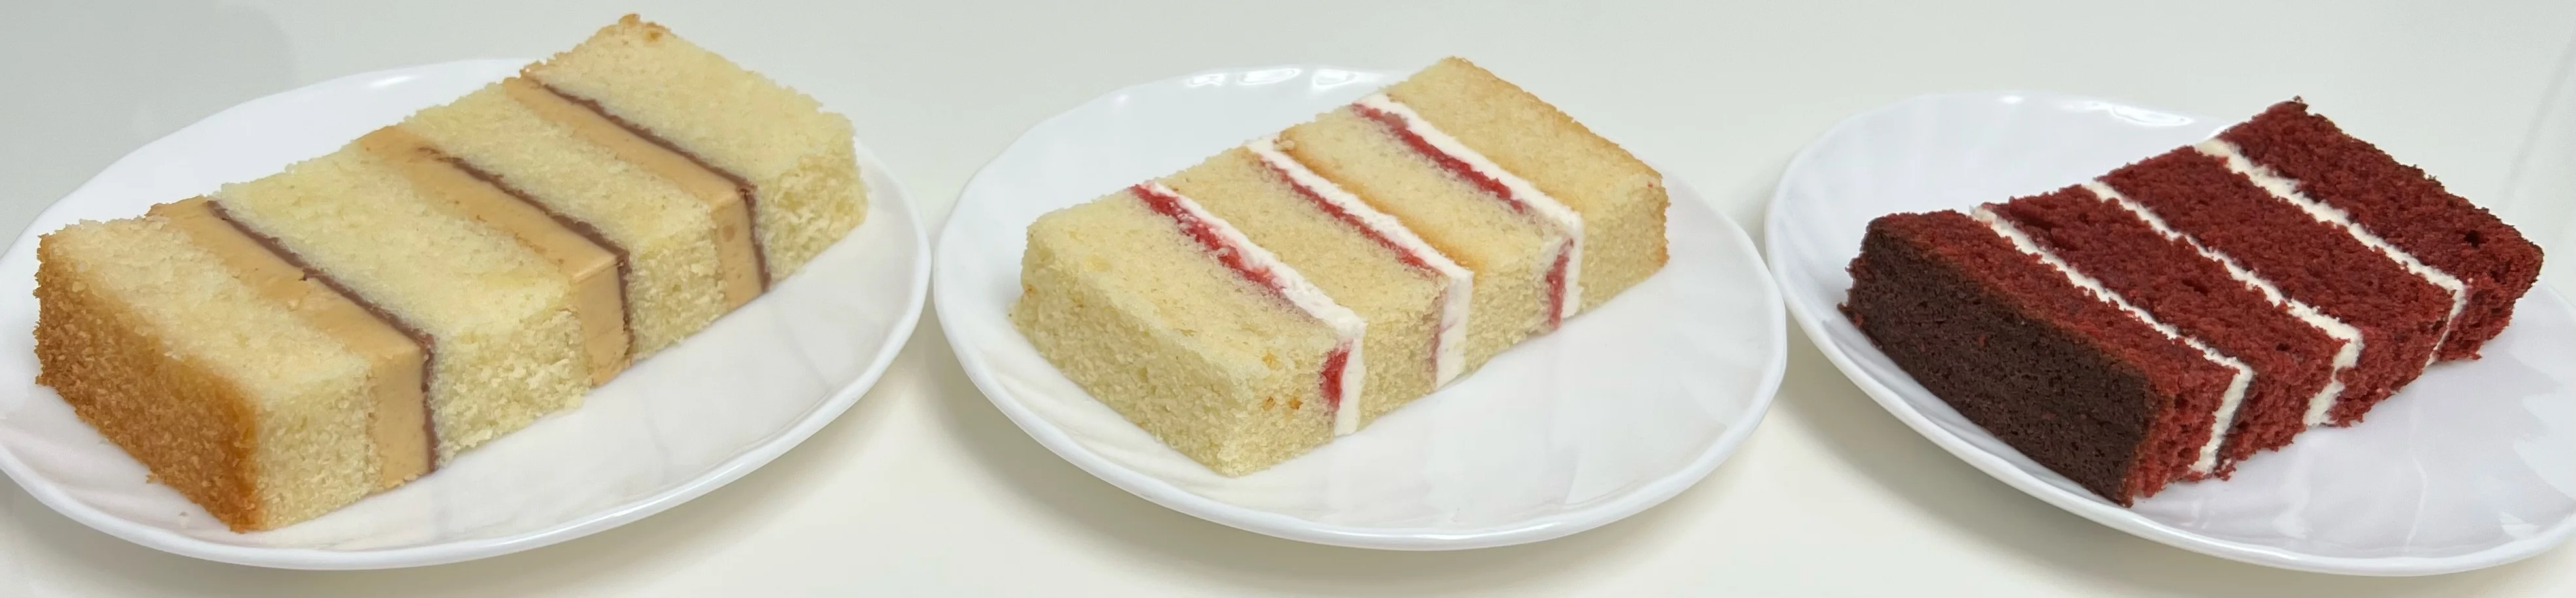 Three individual slices of different flavoured cake in a horizontal line